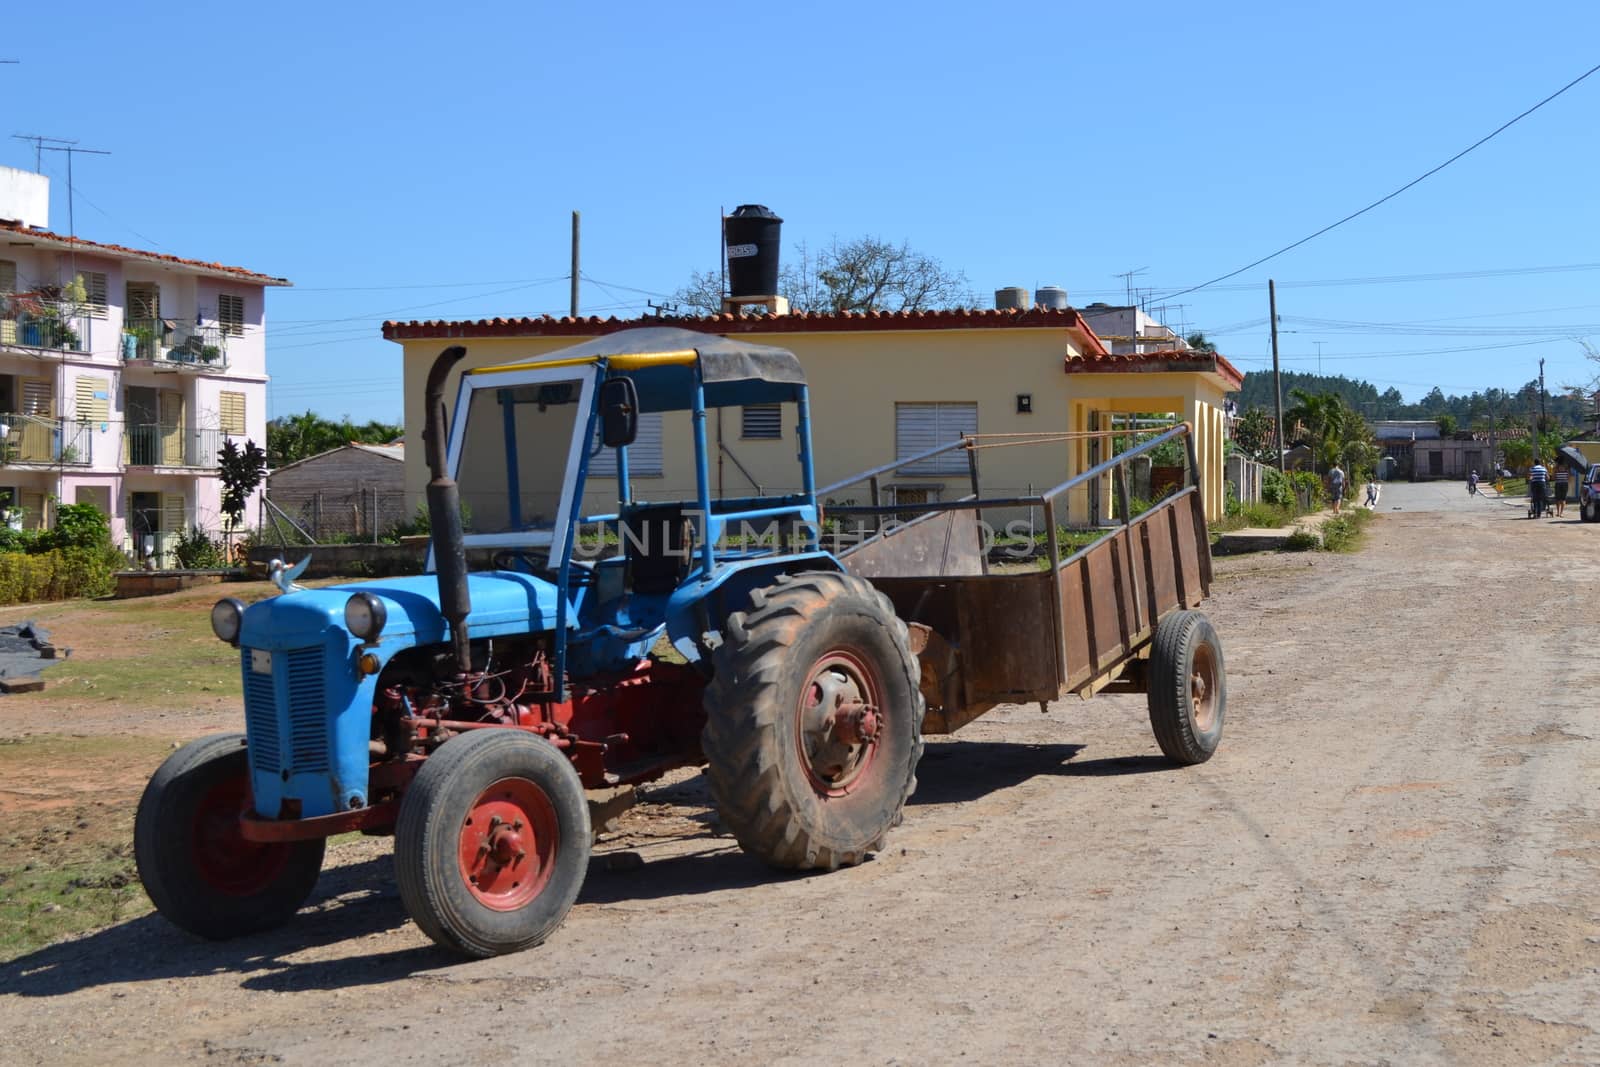 old and vintage blue tractor in the streets of Vinales, Cuba by kb79